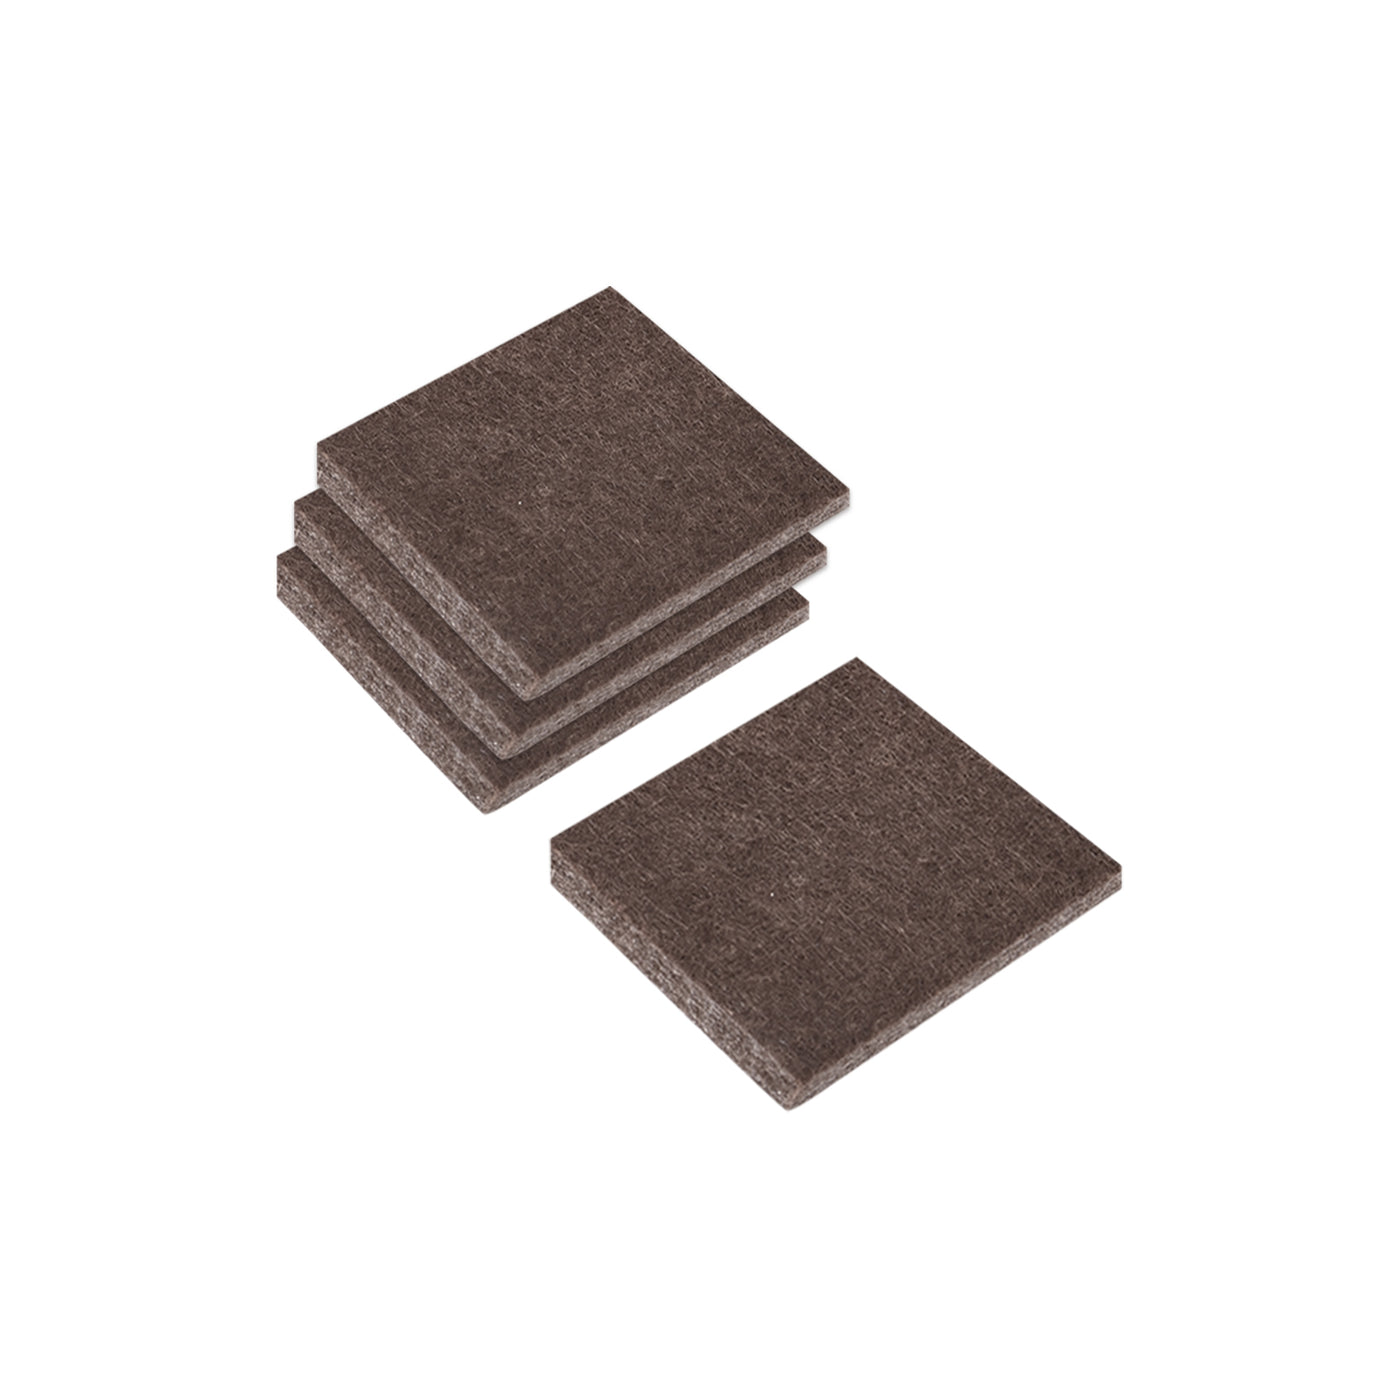 uxcell Uxcell Felt Furniture Pads, 27mm x 27mm Self Adhesive Square Floor Protectors for Furniture Legs Hardwood Floor, Brown 24Pcs